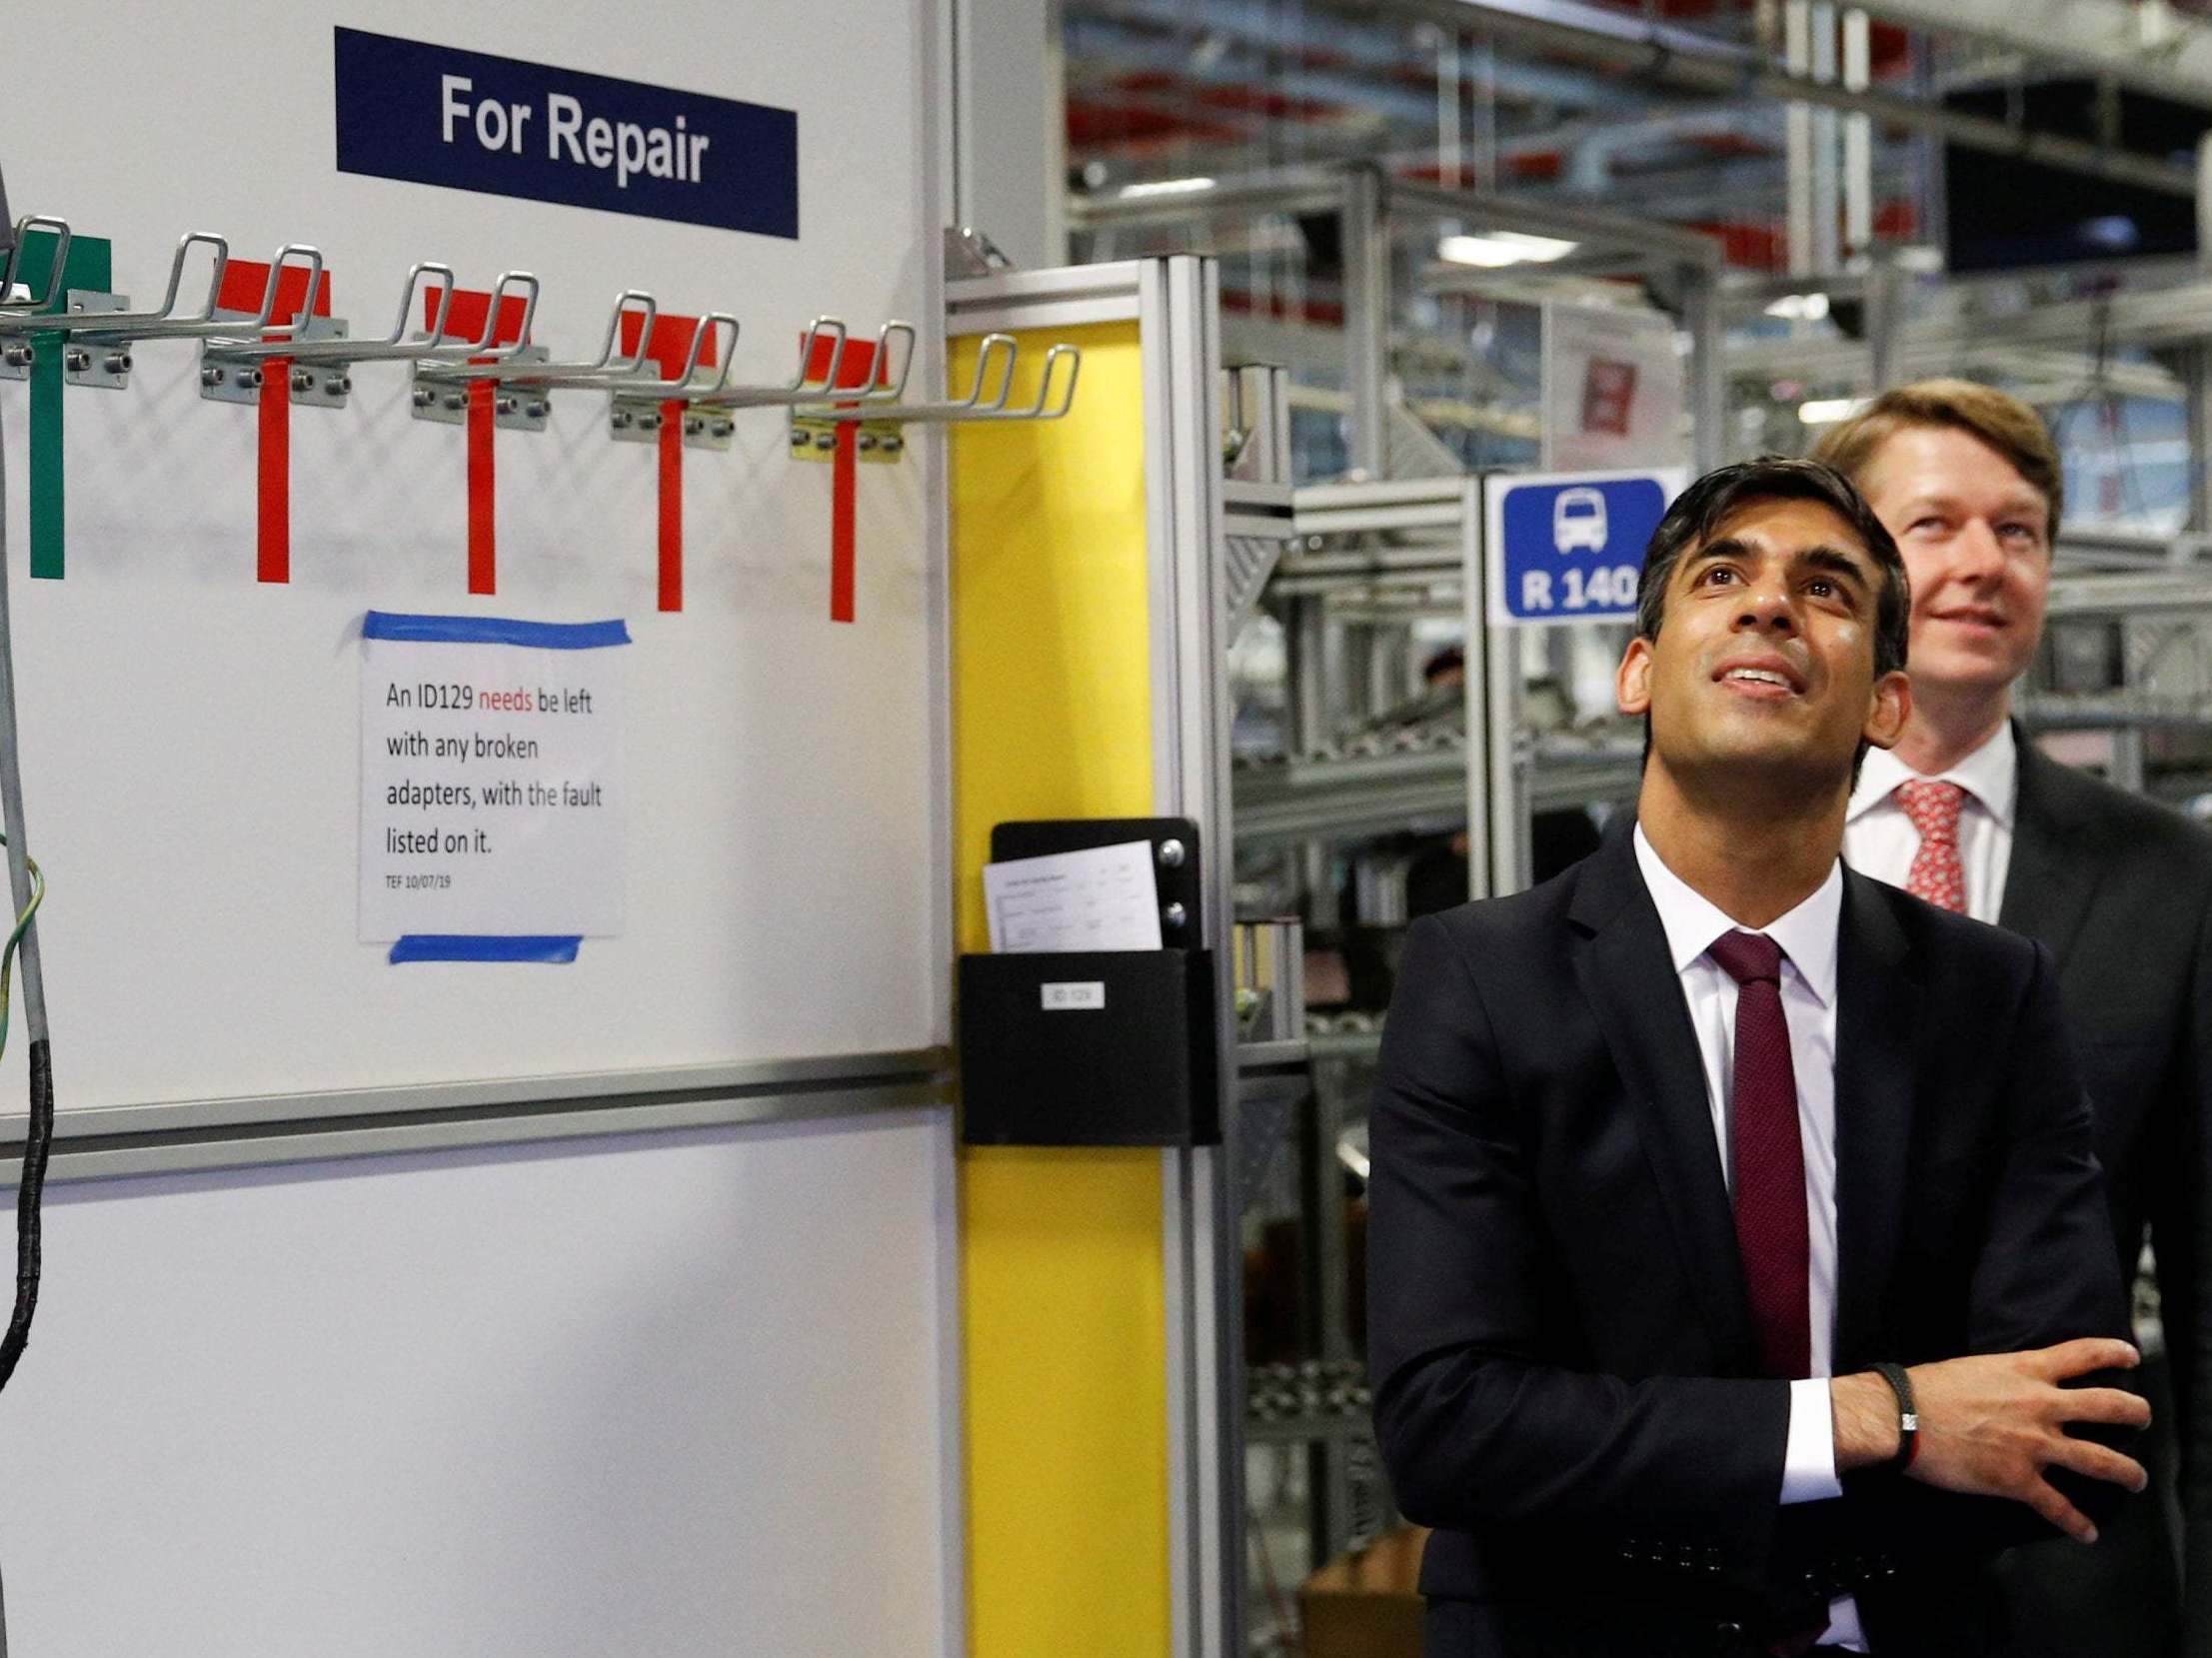 Rishi Sunak is reportedly planning to establish up to 10 new freeports to boost the UK's economy after Brexit